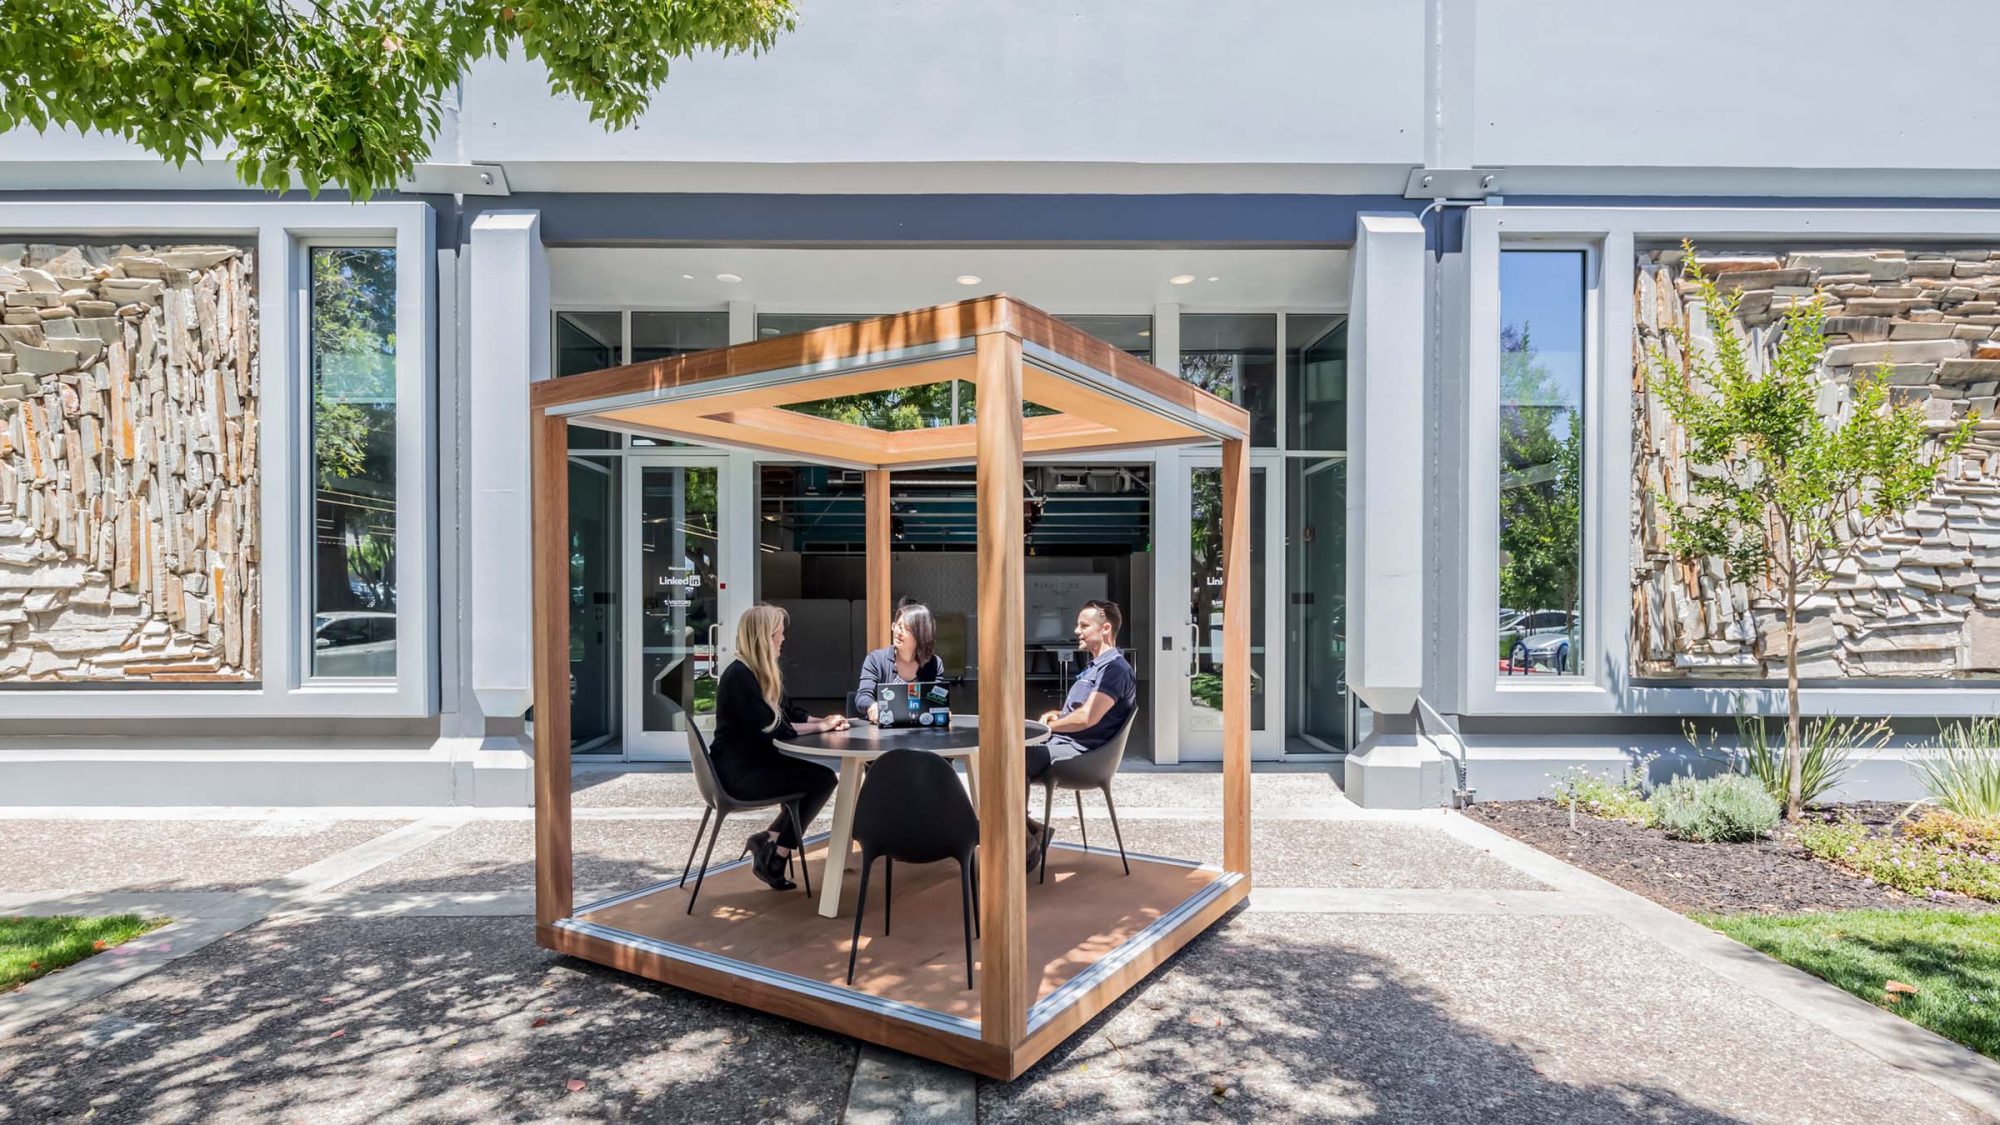 Outdoor meeting space for healthy routine